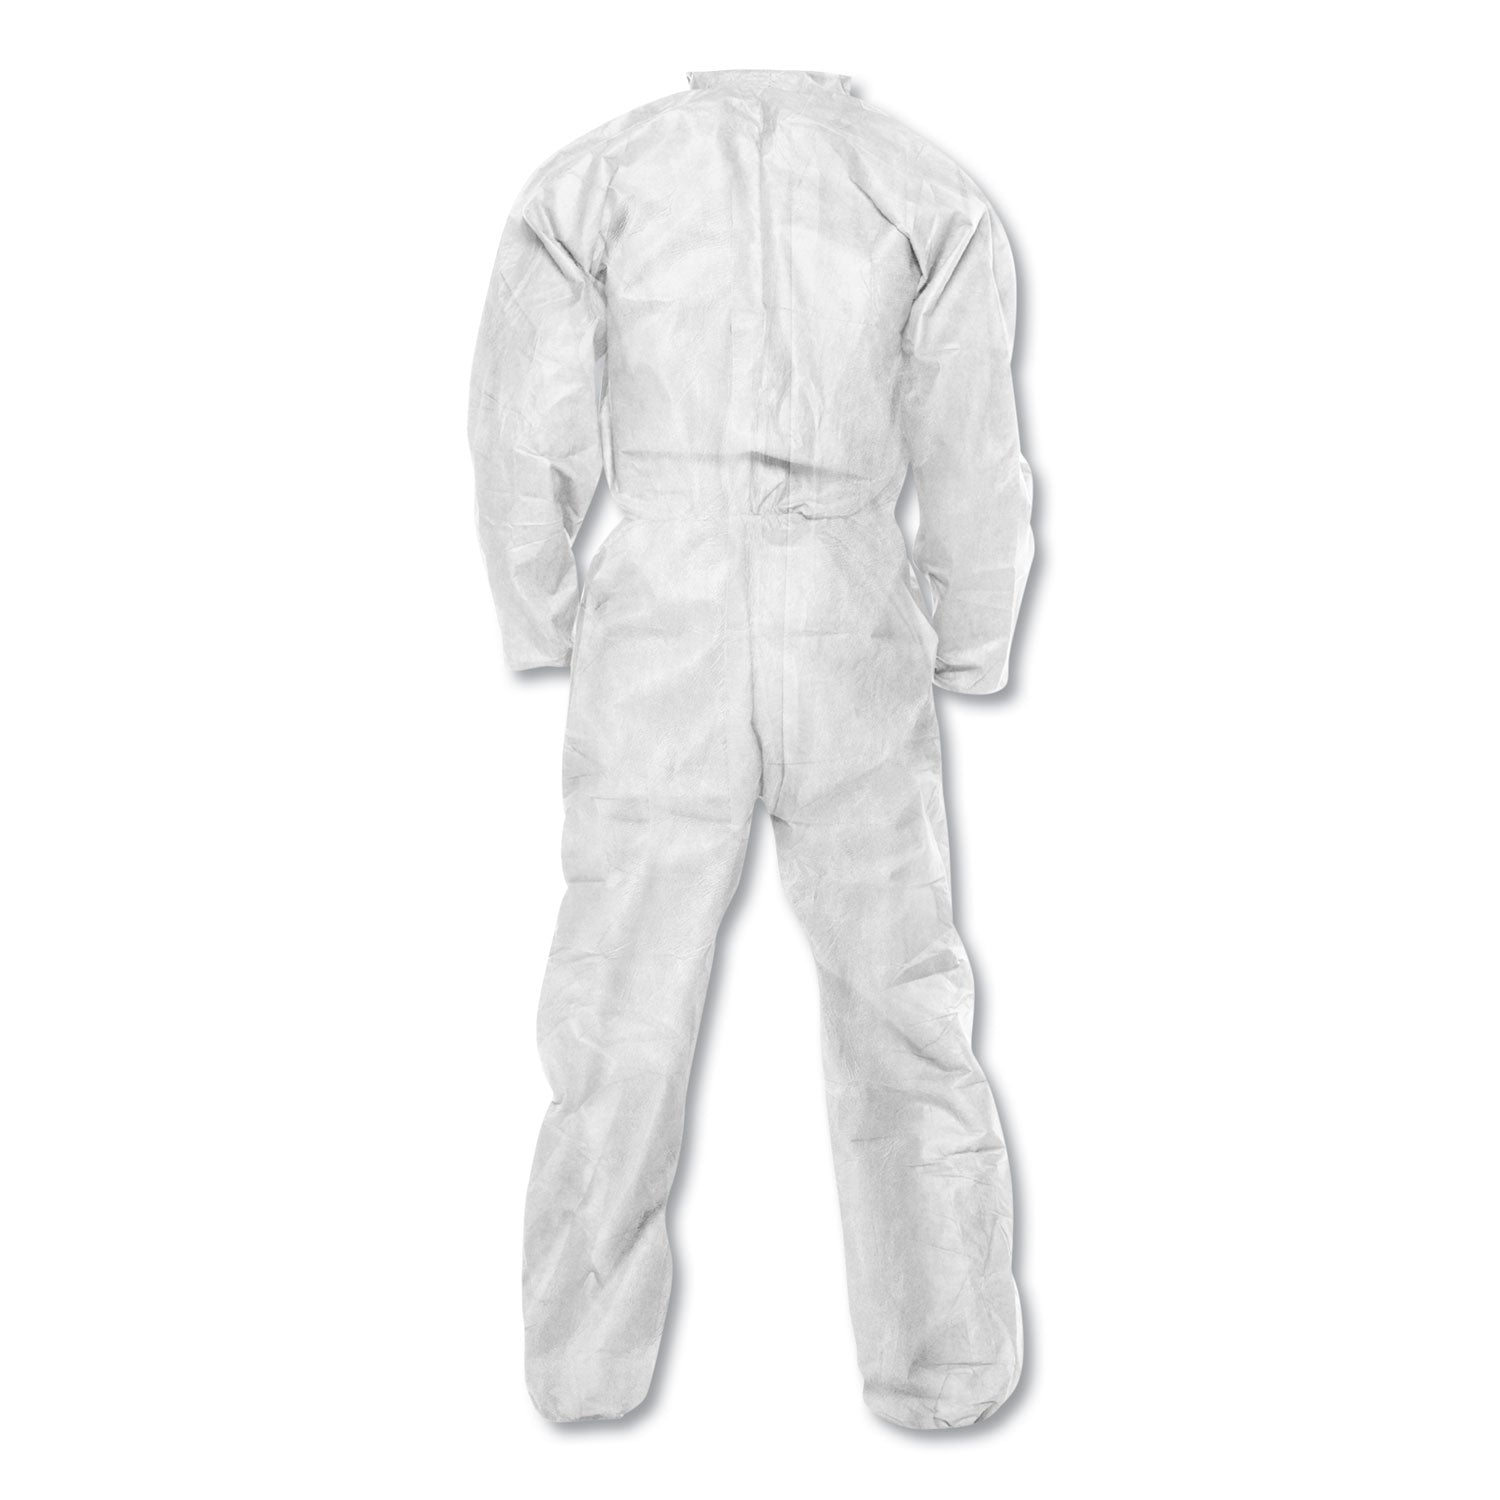 a20-breathable-particle-protection-coveralls-zip-closure-x-large-white_kcc49104 - 6